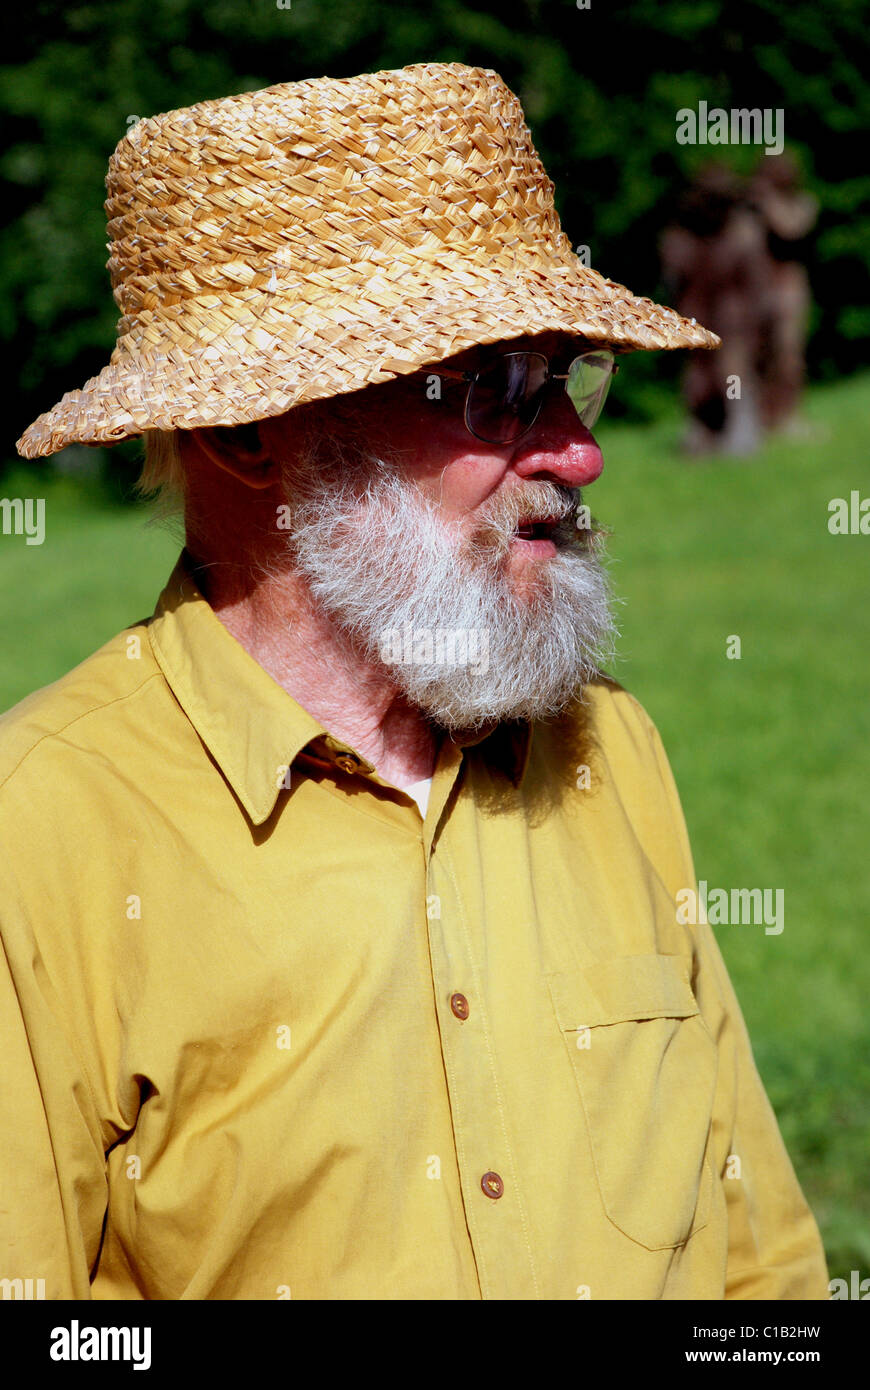 old man with grey beard and glasses wearing shirt in village Stock Photo